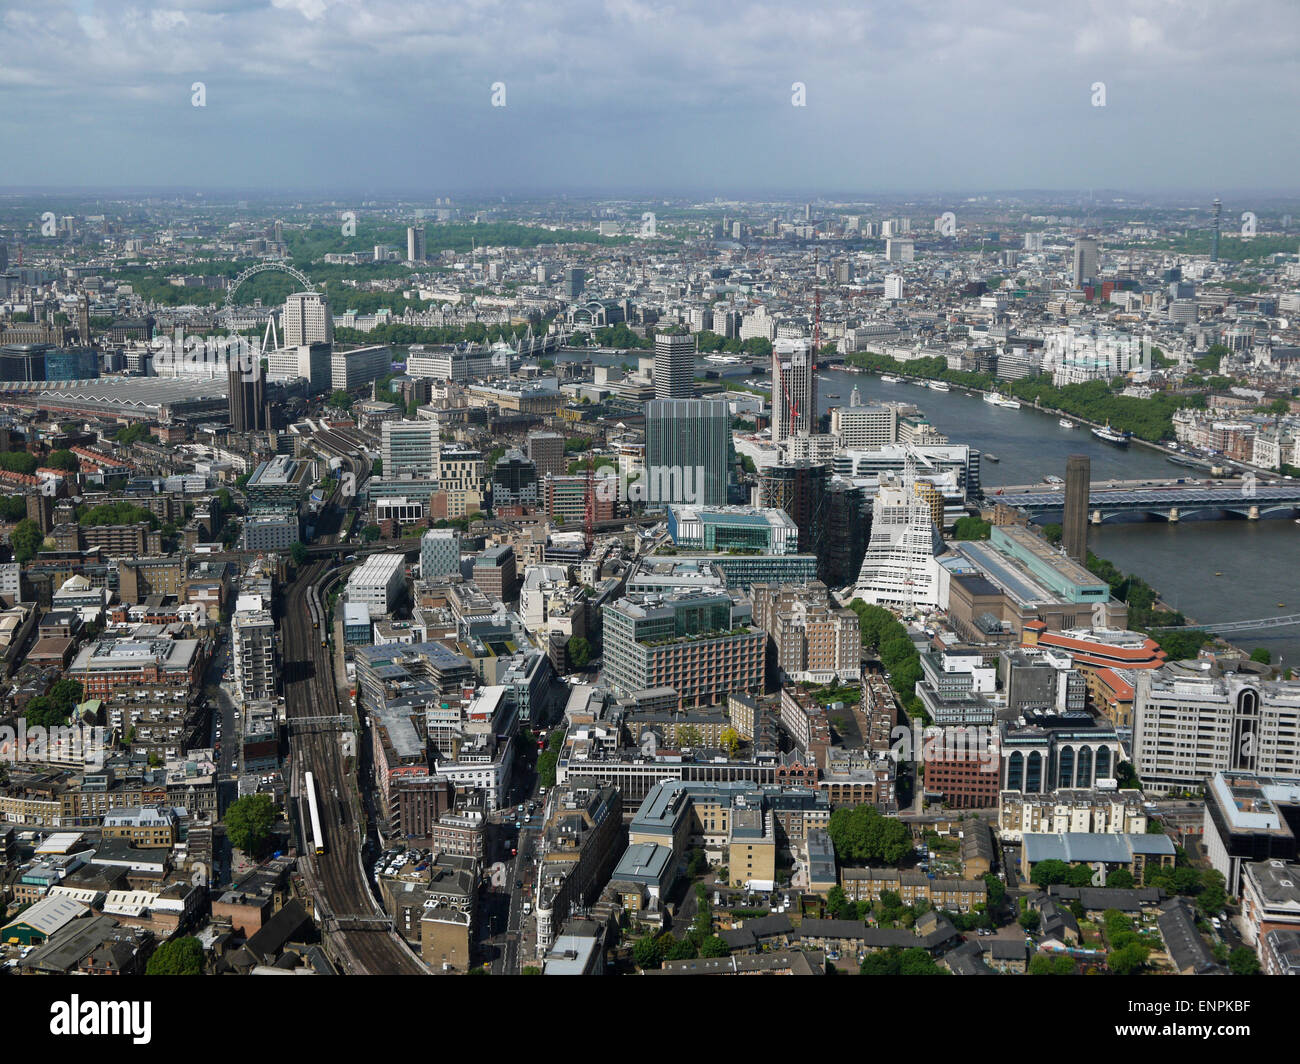 View towards Palace of Westminster and The London Eye, showing Blackfriars bridge from The Shard, London Bridge, London, UK. Stock Photo